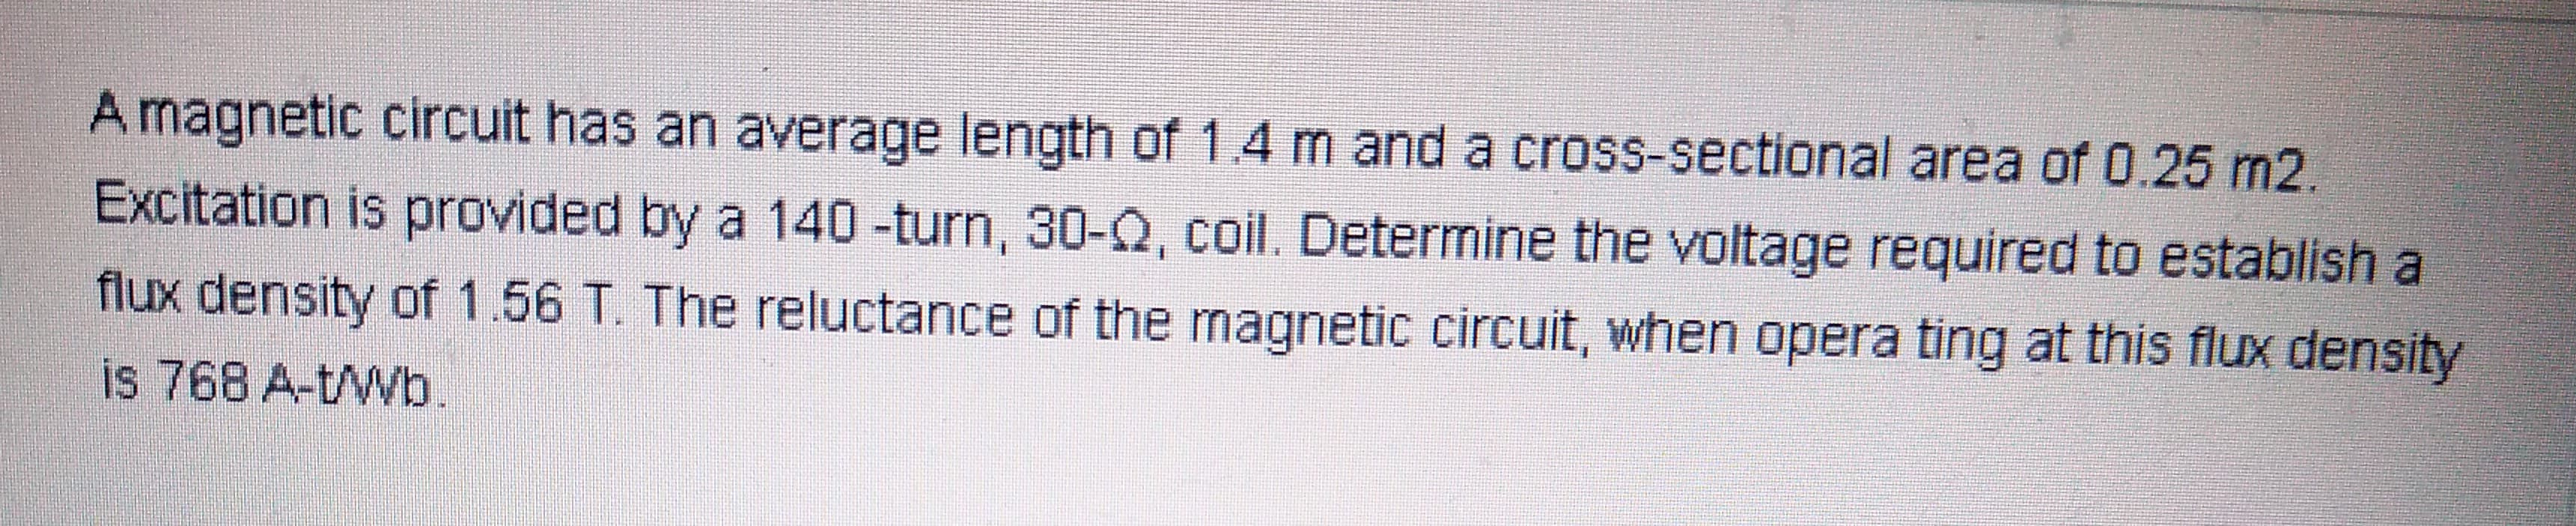 Amagnetic circuit has an average length of 1.4 m and a cross-sectional area of 0.25 m2.
Excitation is provided by a 140 -turn, 30-Q, coil. Determine the voltage required to establish a
flux density of 1.56 T. The reluctance of the magnetic circuit, when opera ting at this flux density
is 768 A-t/Wb.
